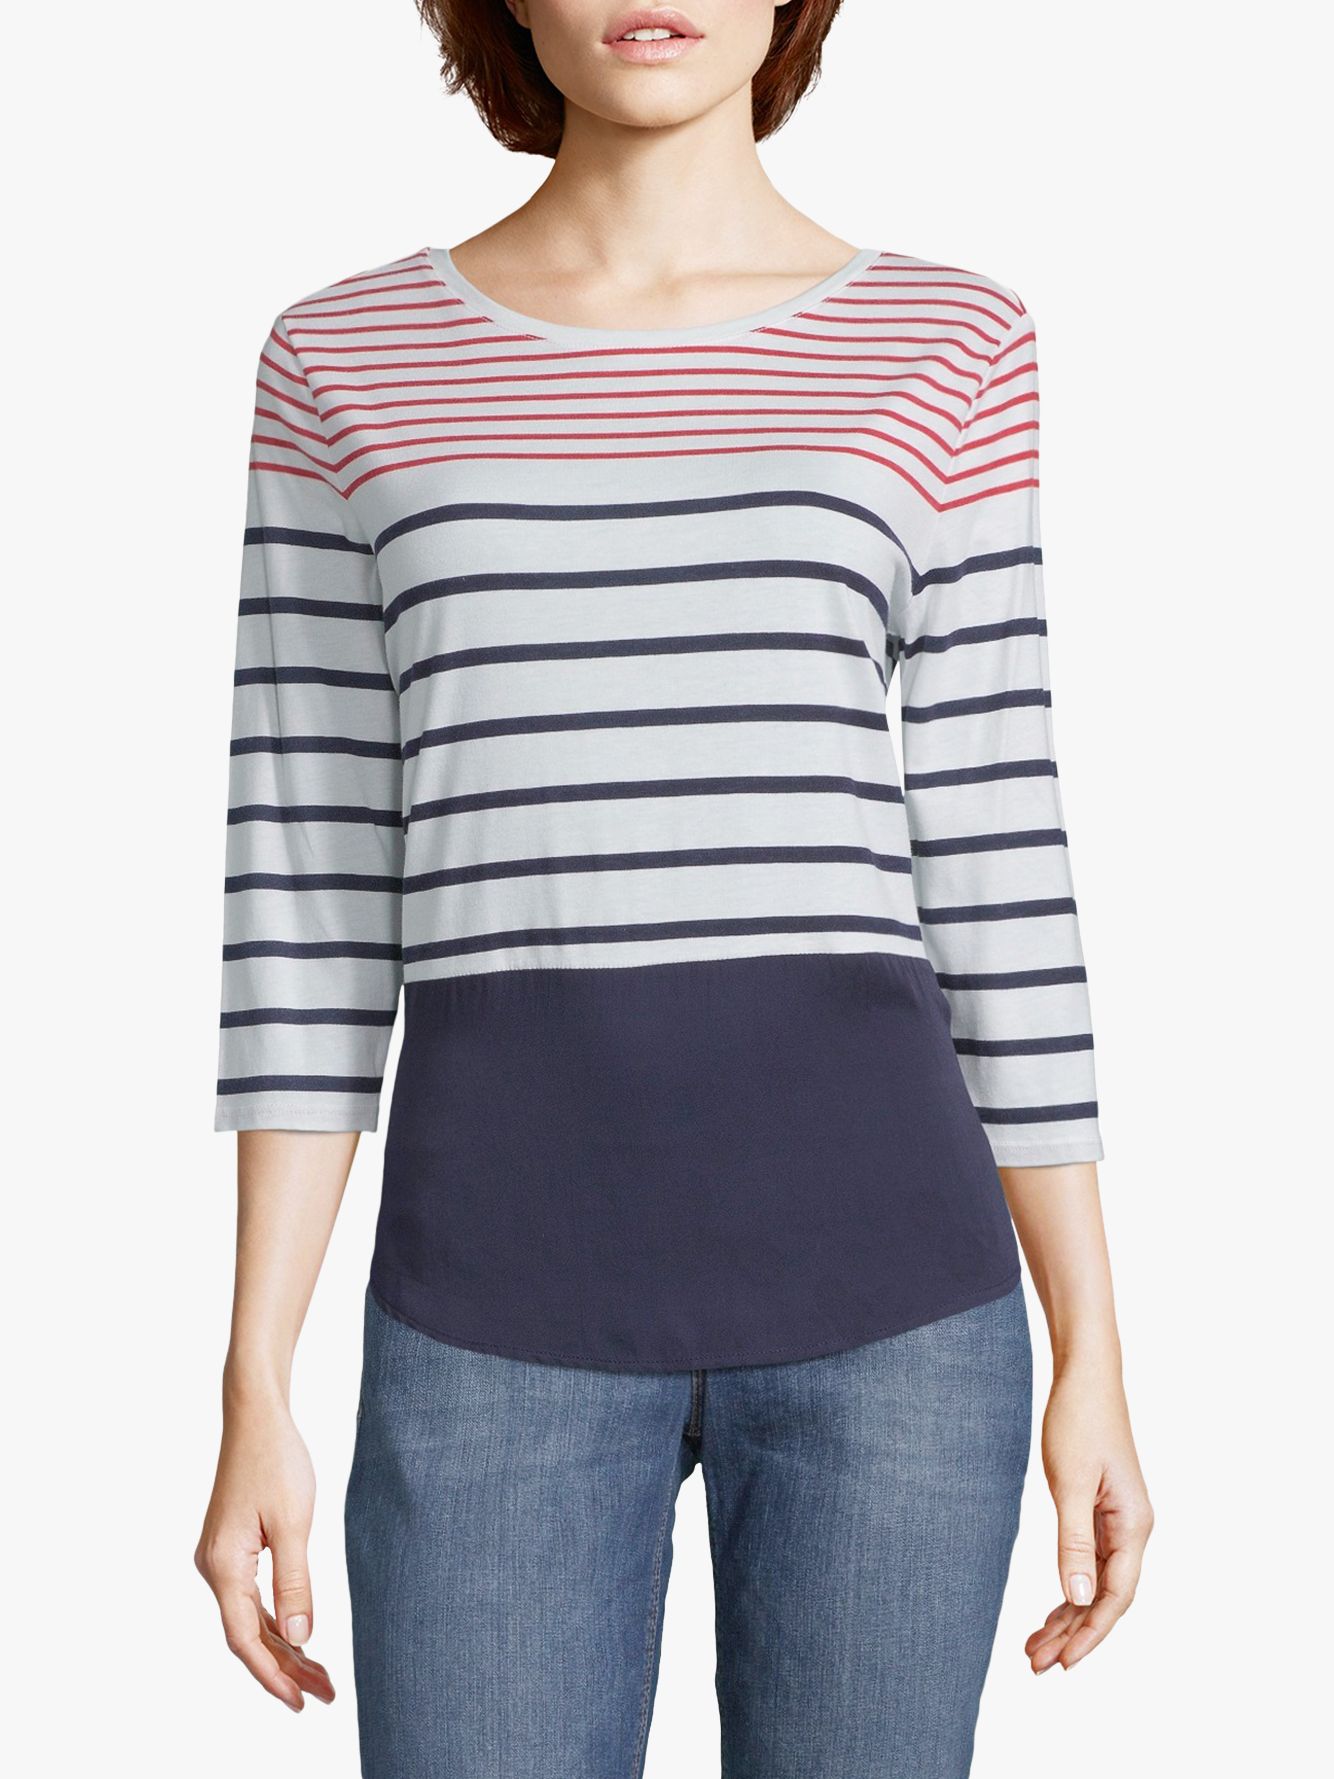 Betty & Co. Colour Block Striped Top, Red/White/Blue